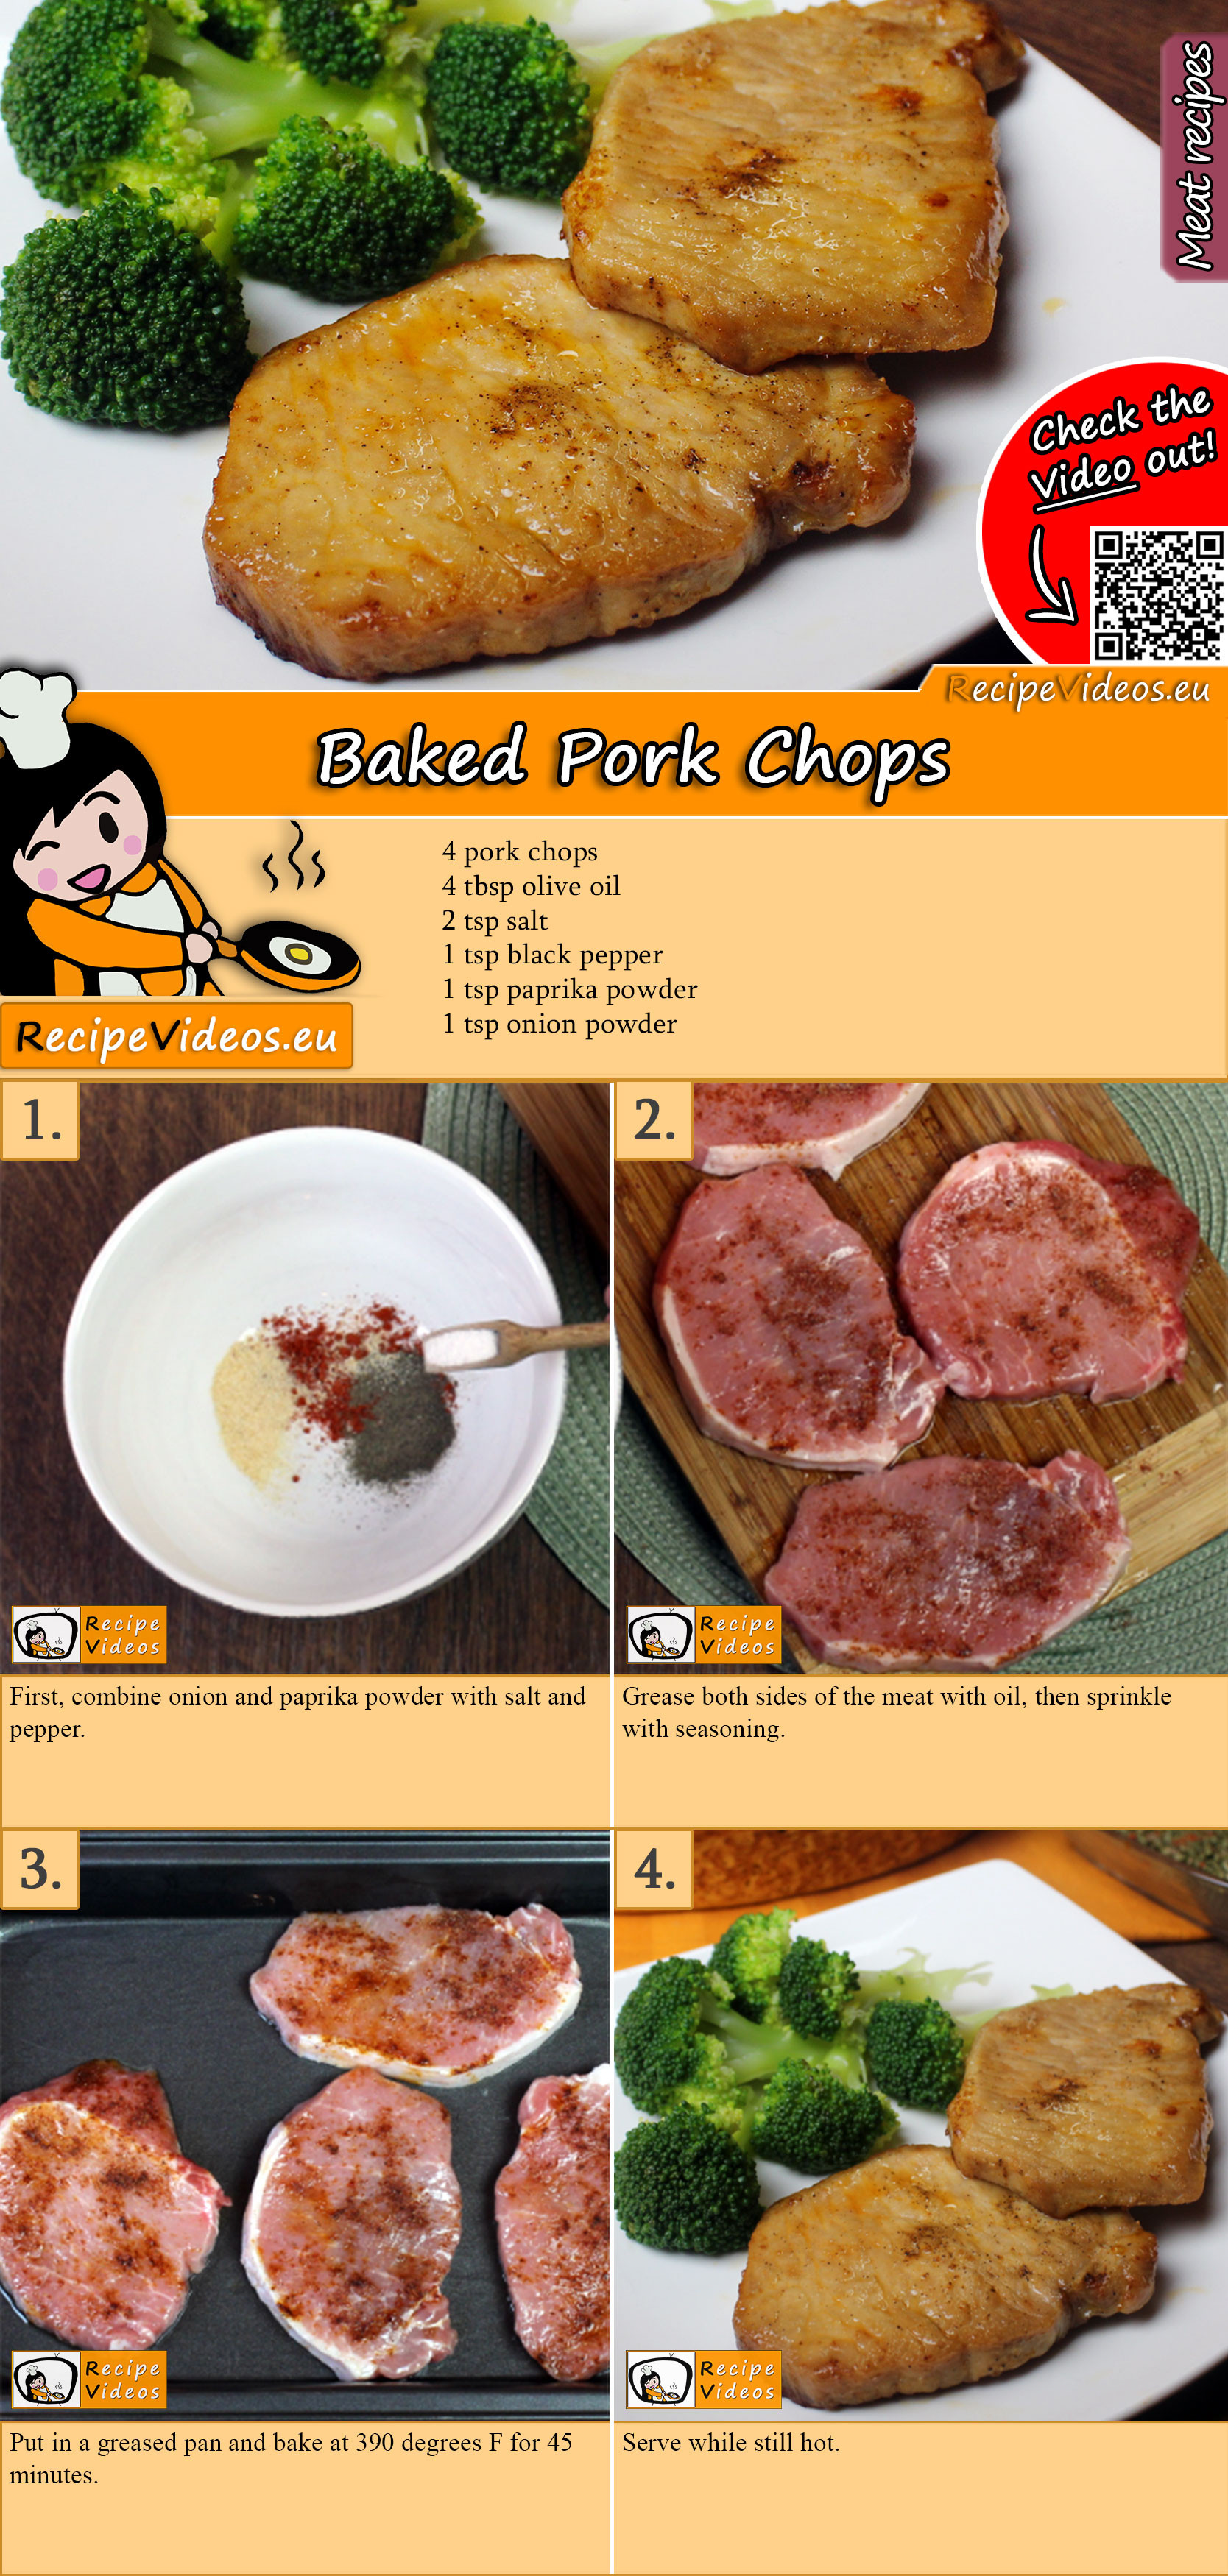 Baked Pork Chops recipe with video